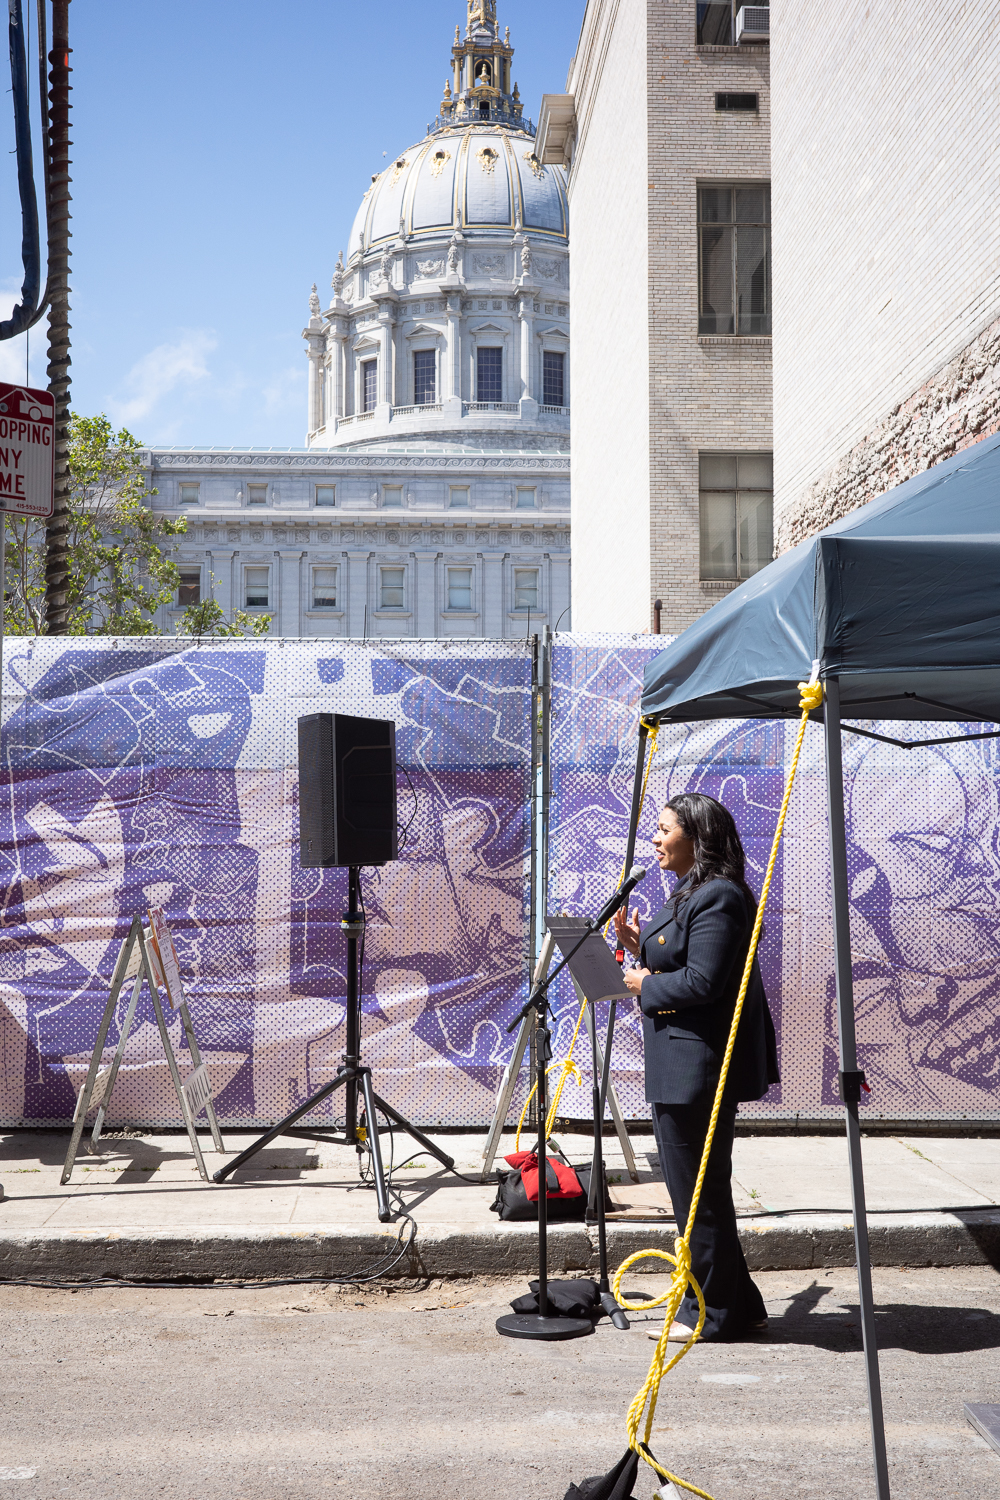 Mayor London Breed speaking at the Kelsey groundbreaking with City Hall in the background, image by author